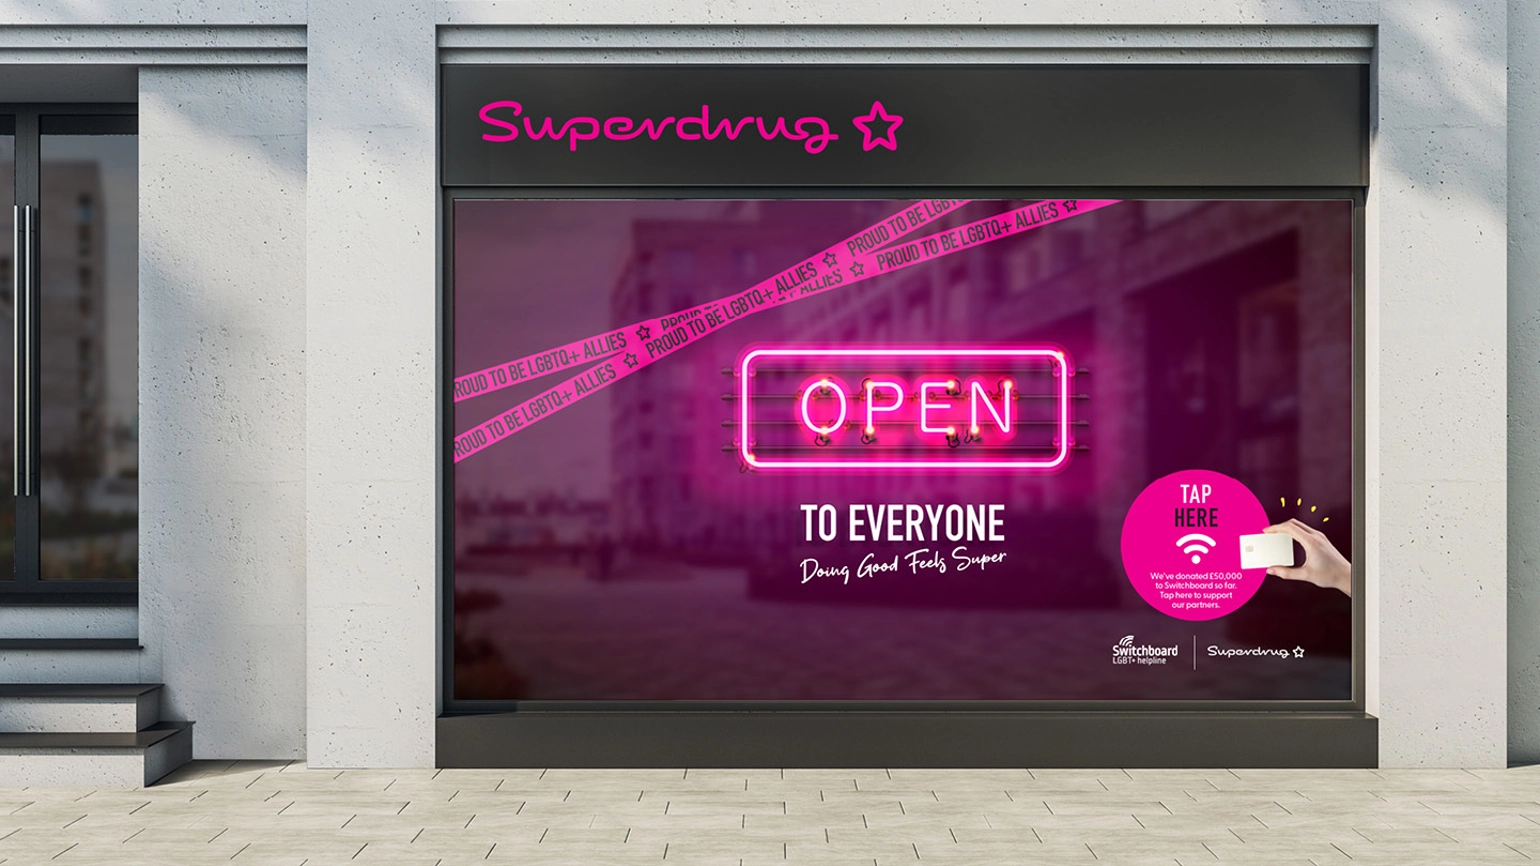 Mock up of a Superdrug shop window which shows a sign that says open to everyone